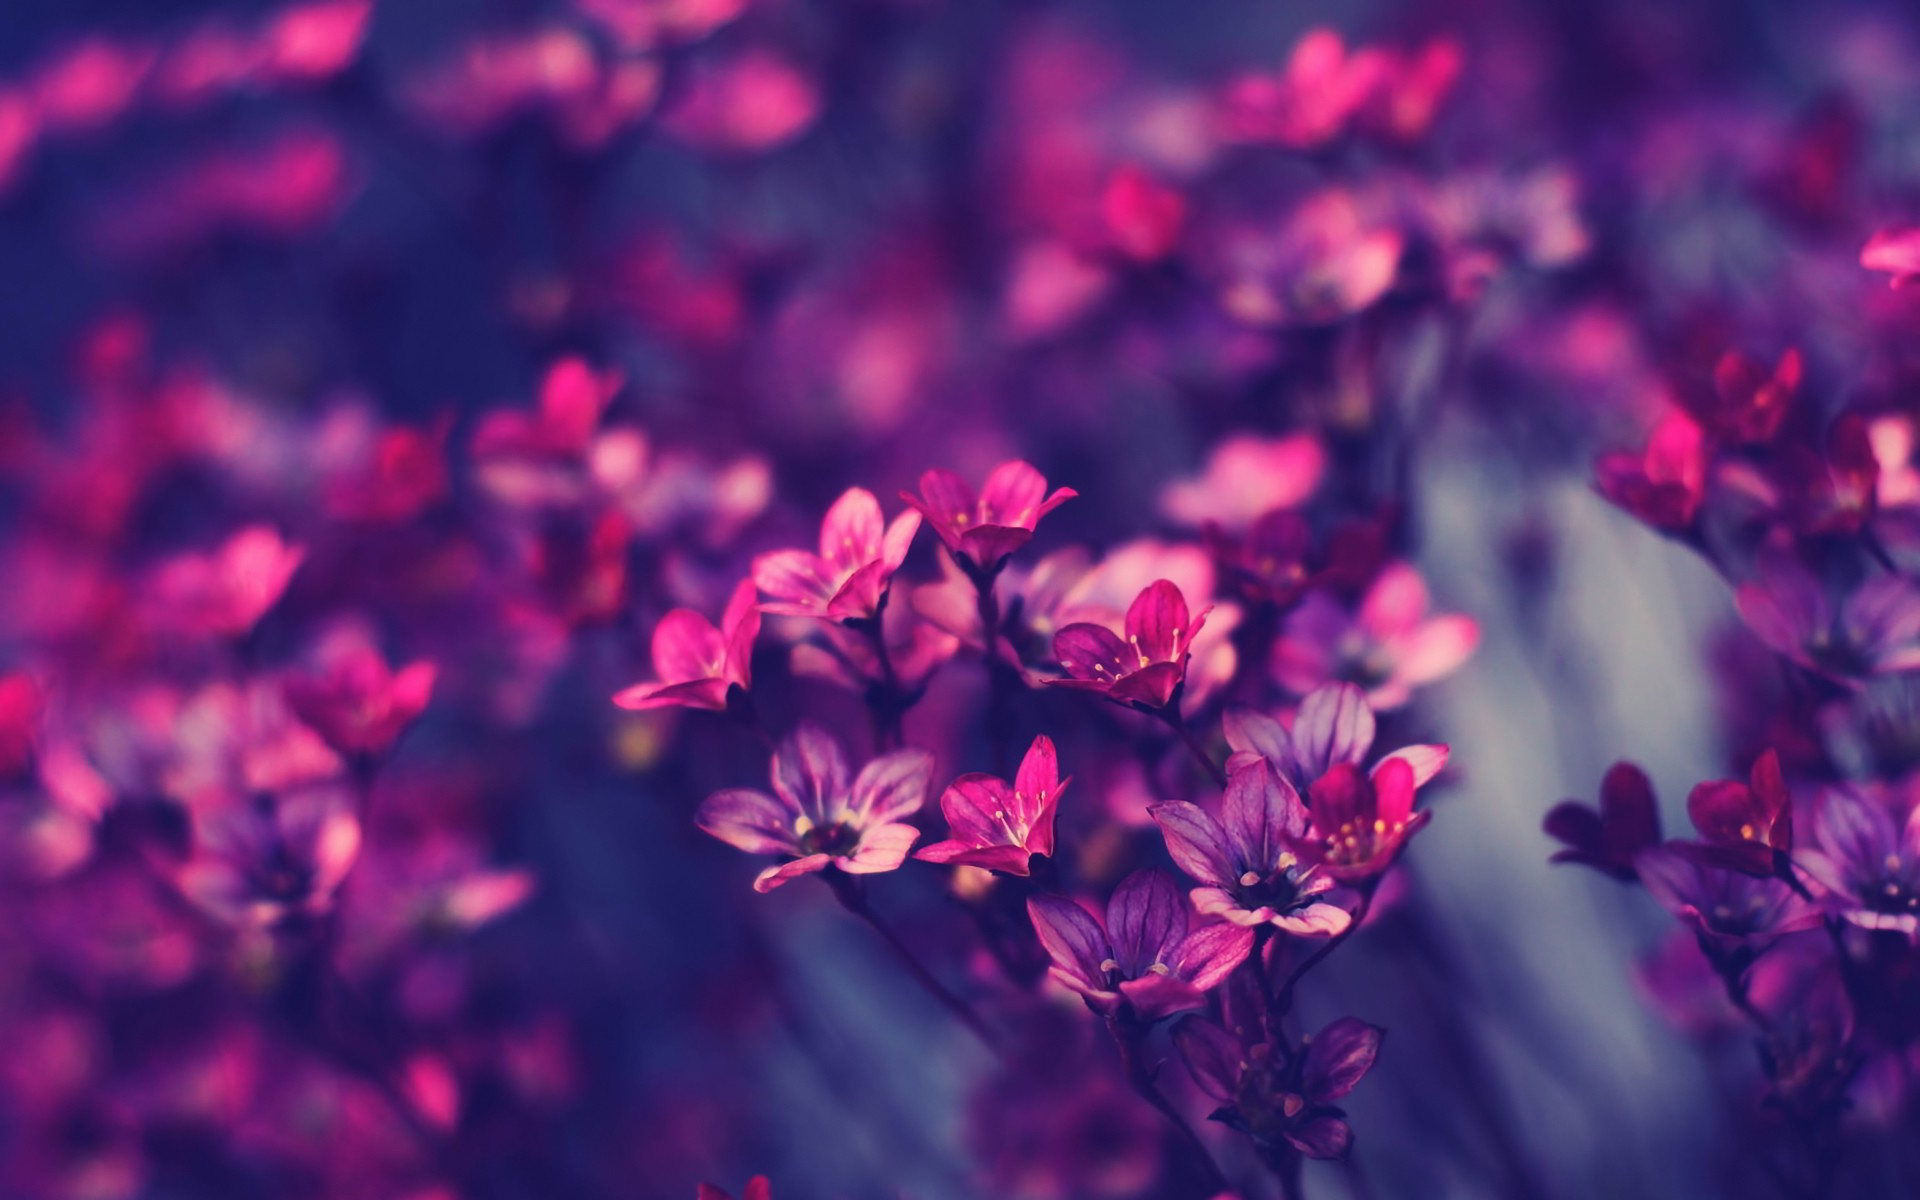 43 HD Purple WallpaperBackground Images To Download For Free